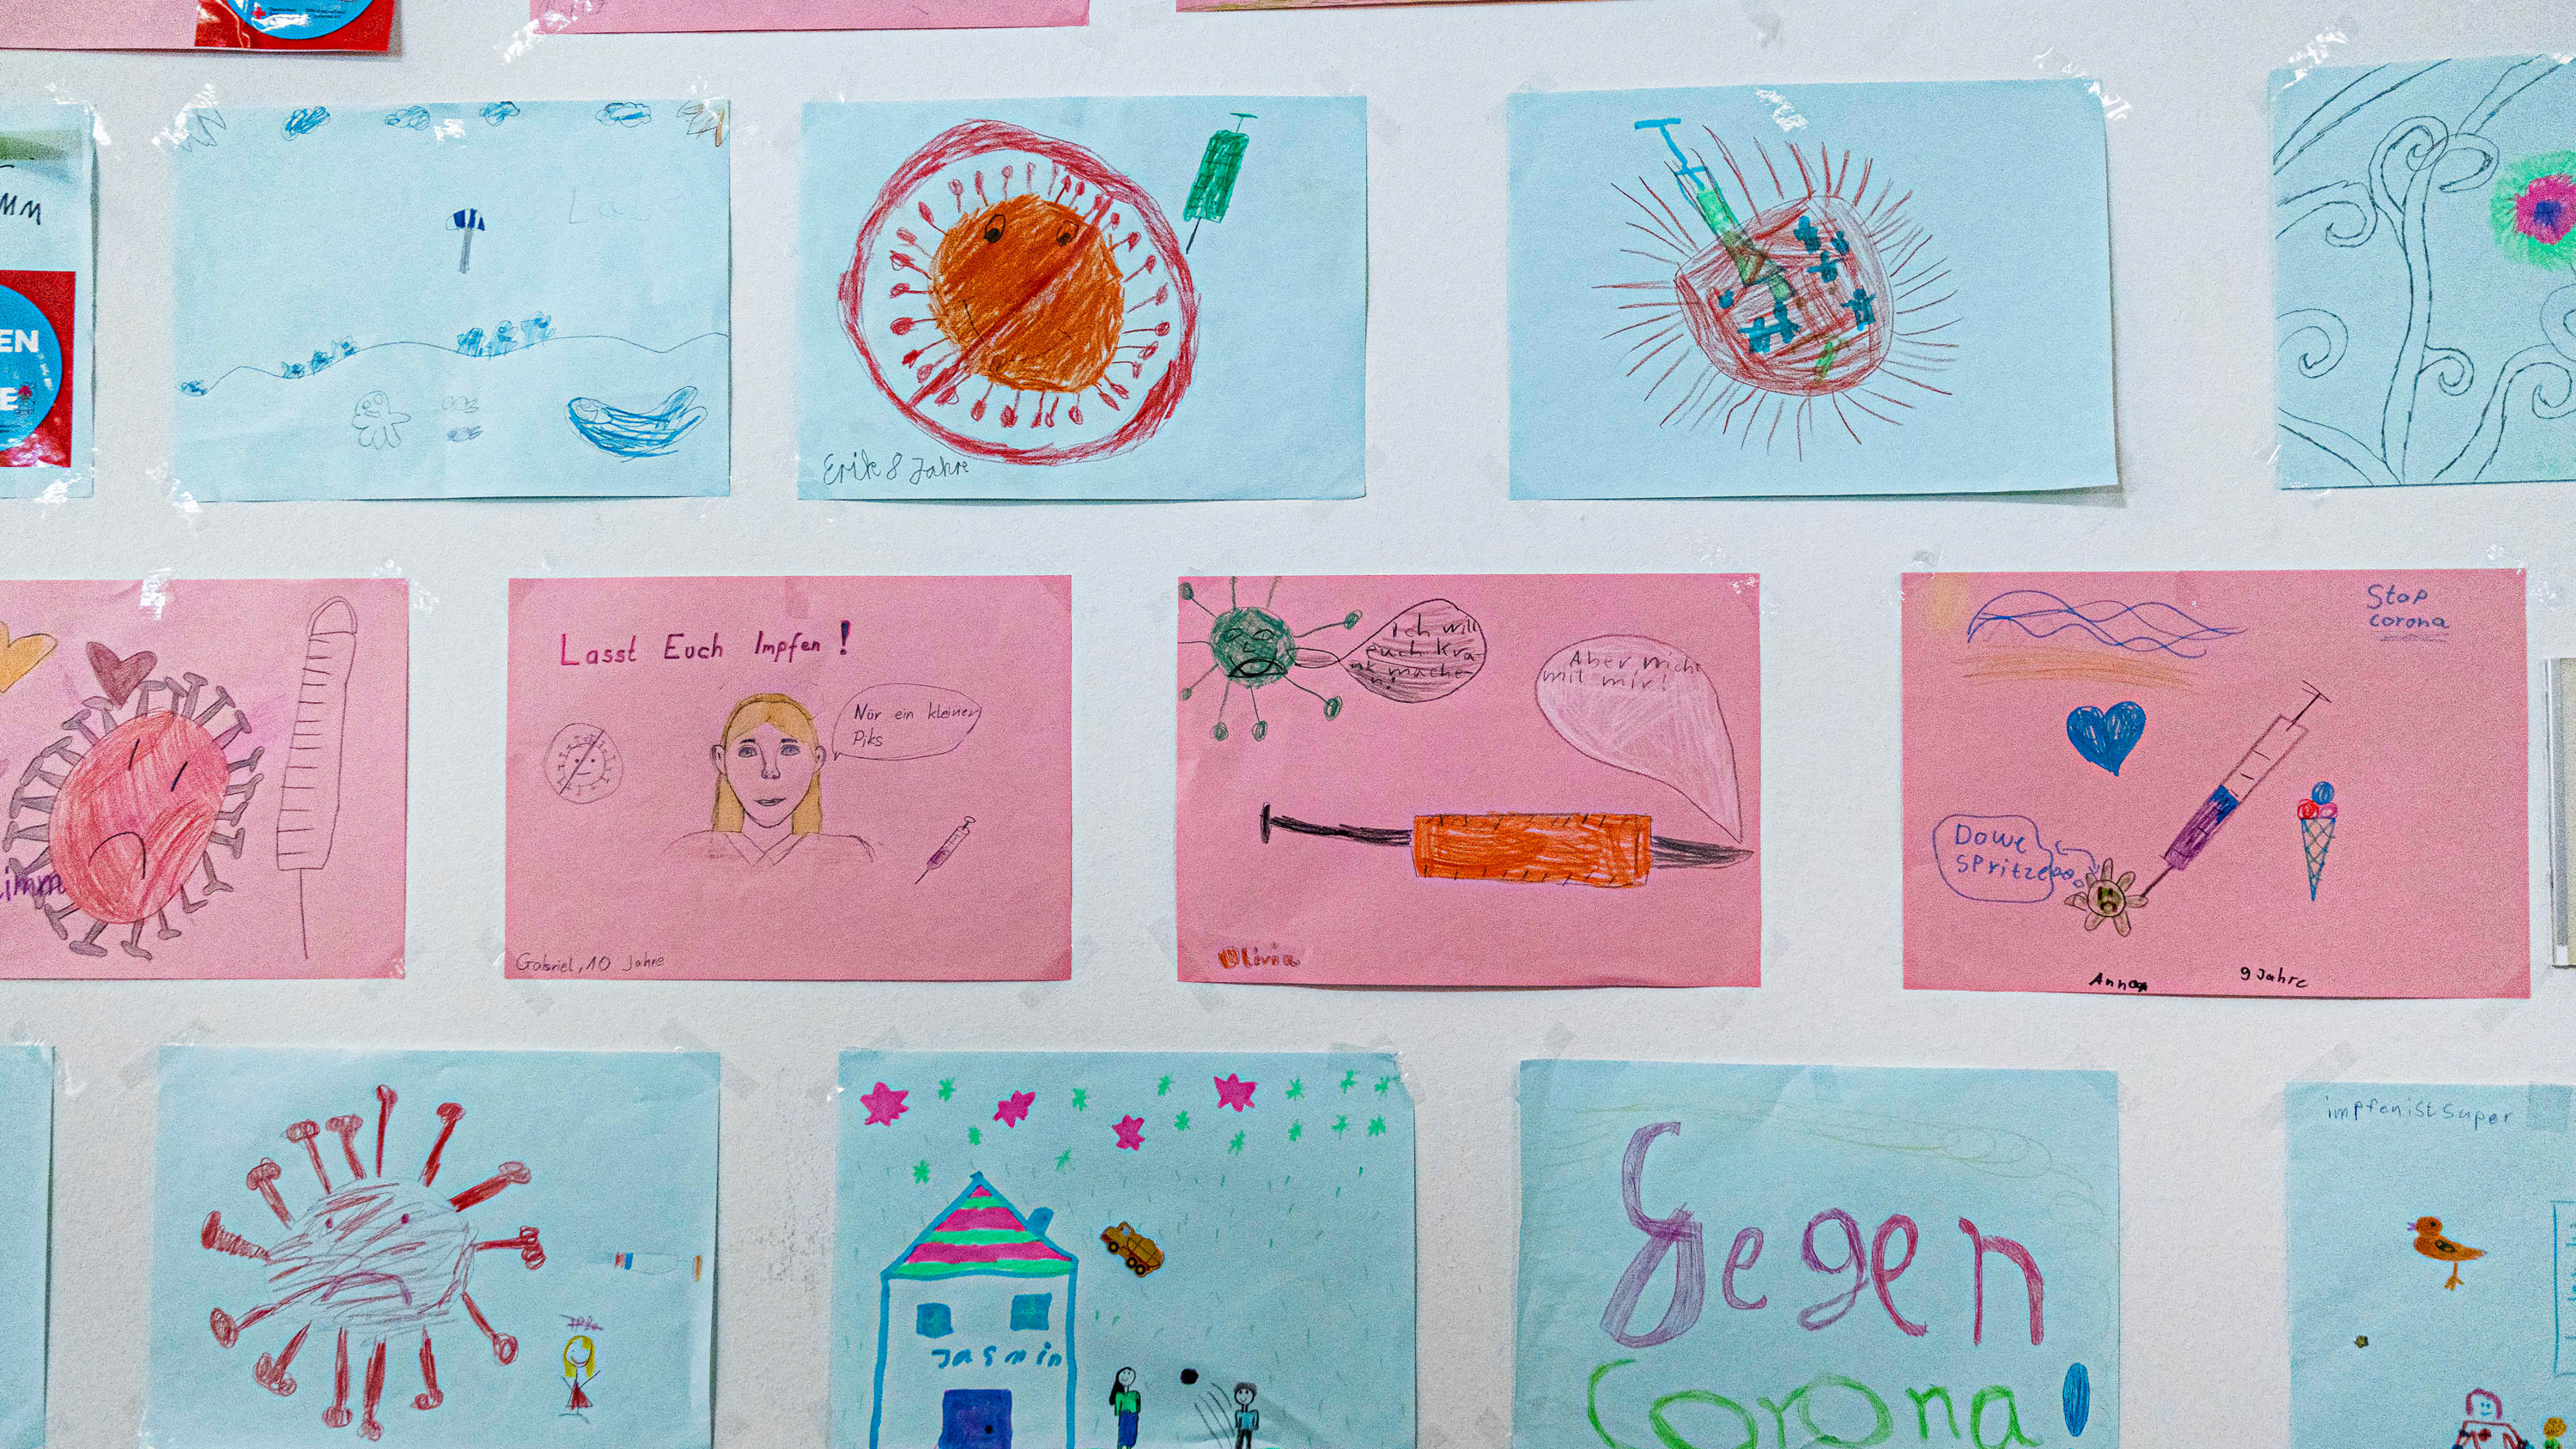 Pictures drawn by children are displayed on one wall at the Tegel vaccination center in Germany